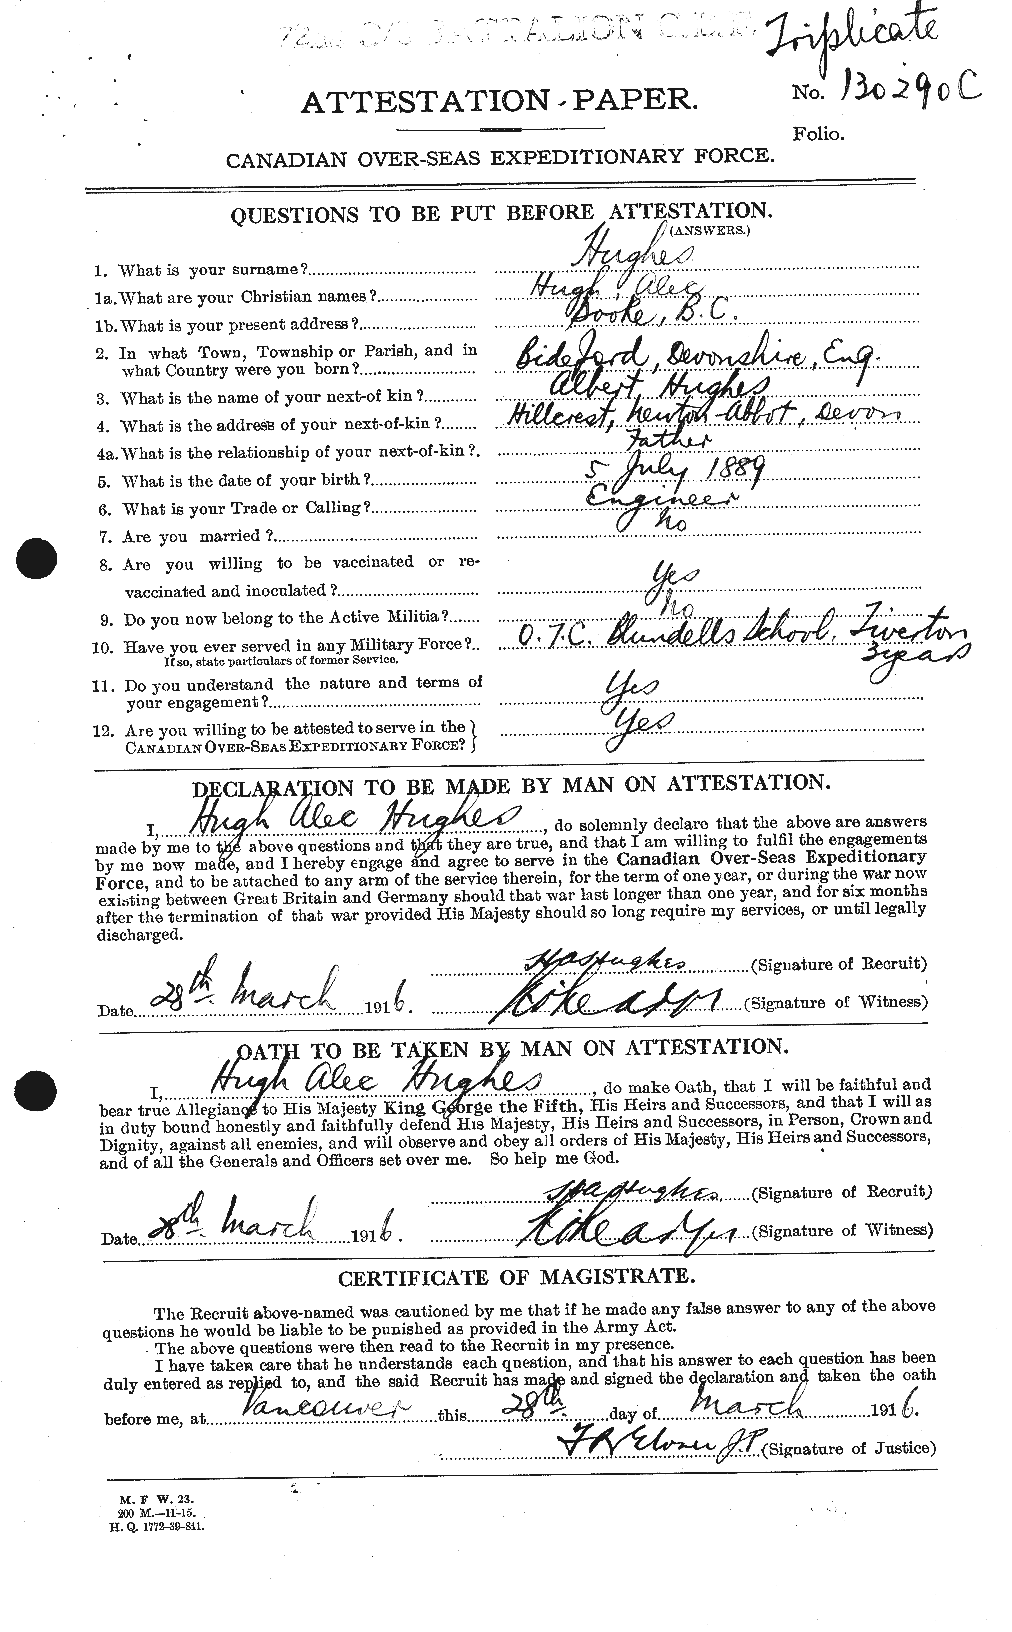 Personnel Records of the First World War - CEF 403922a